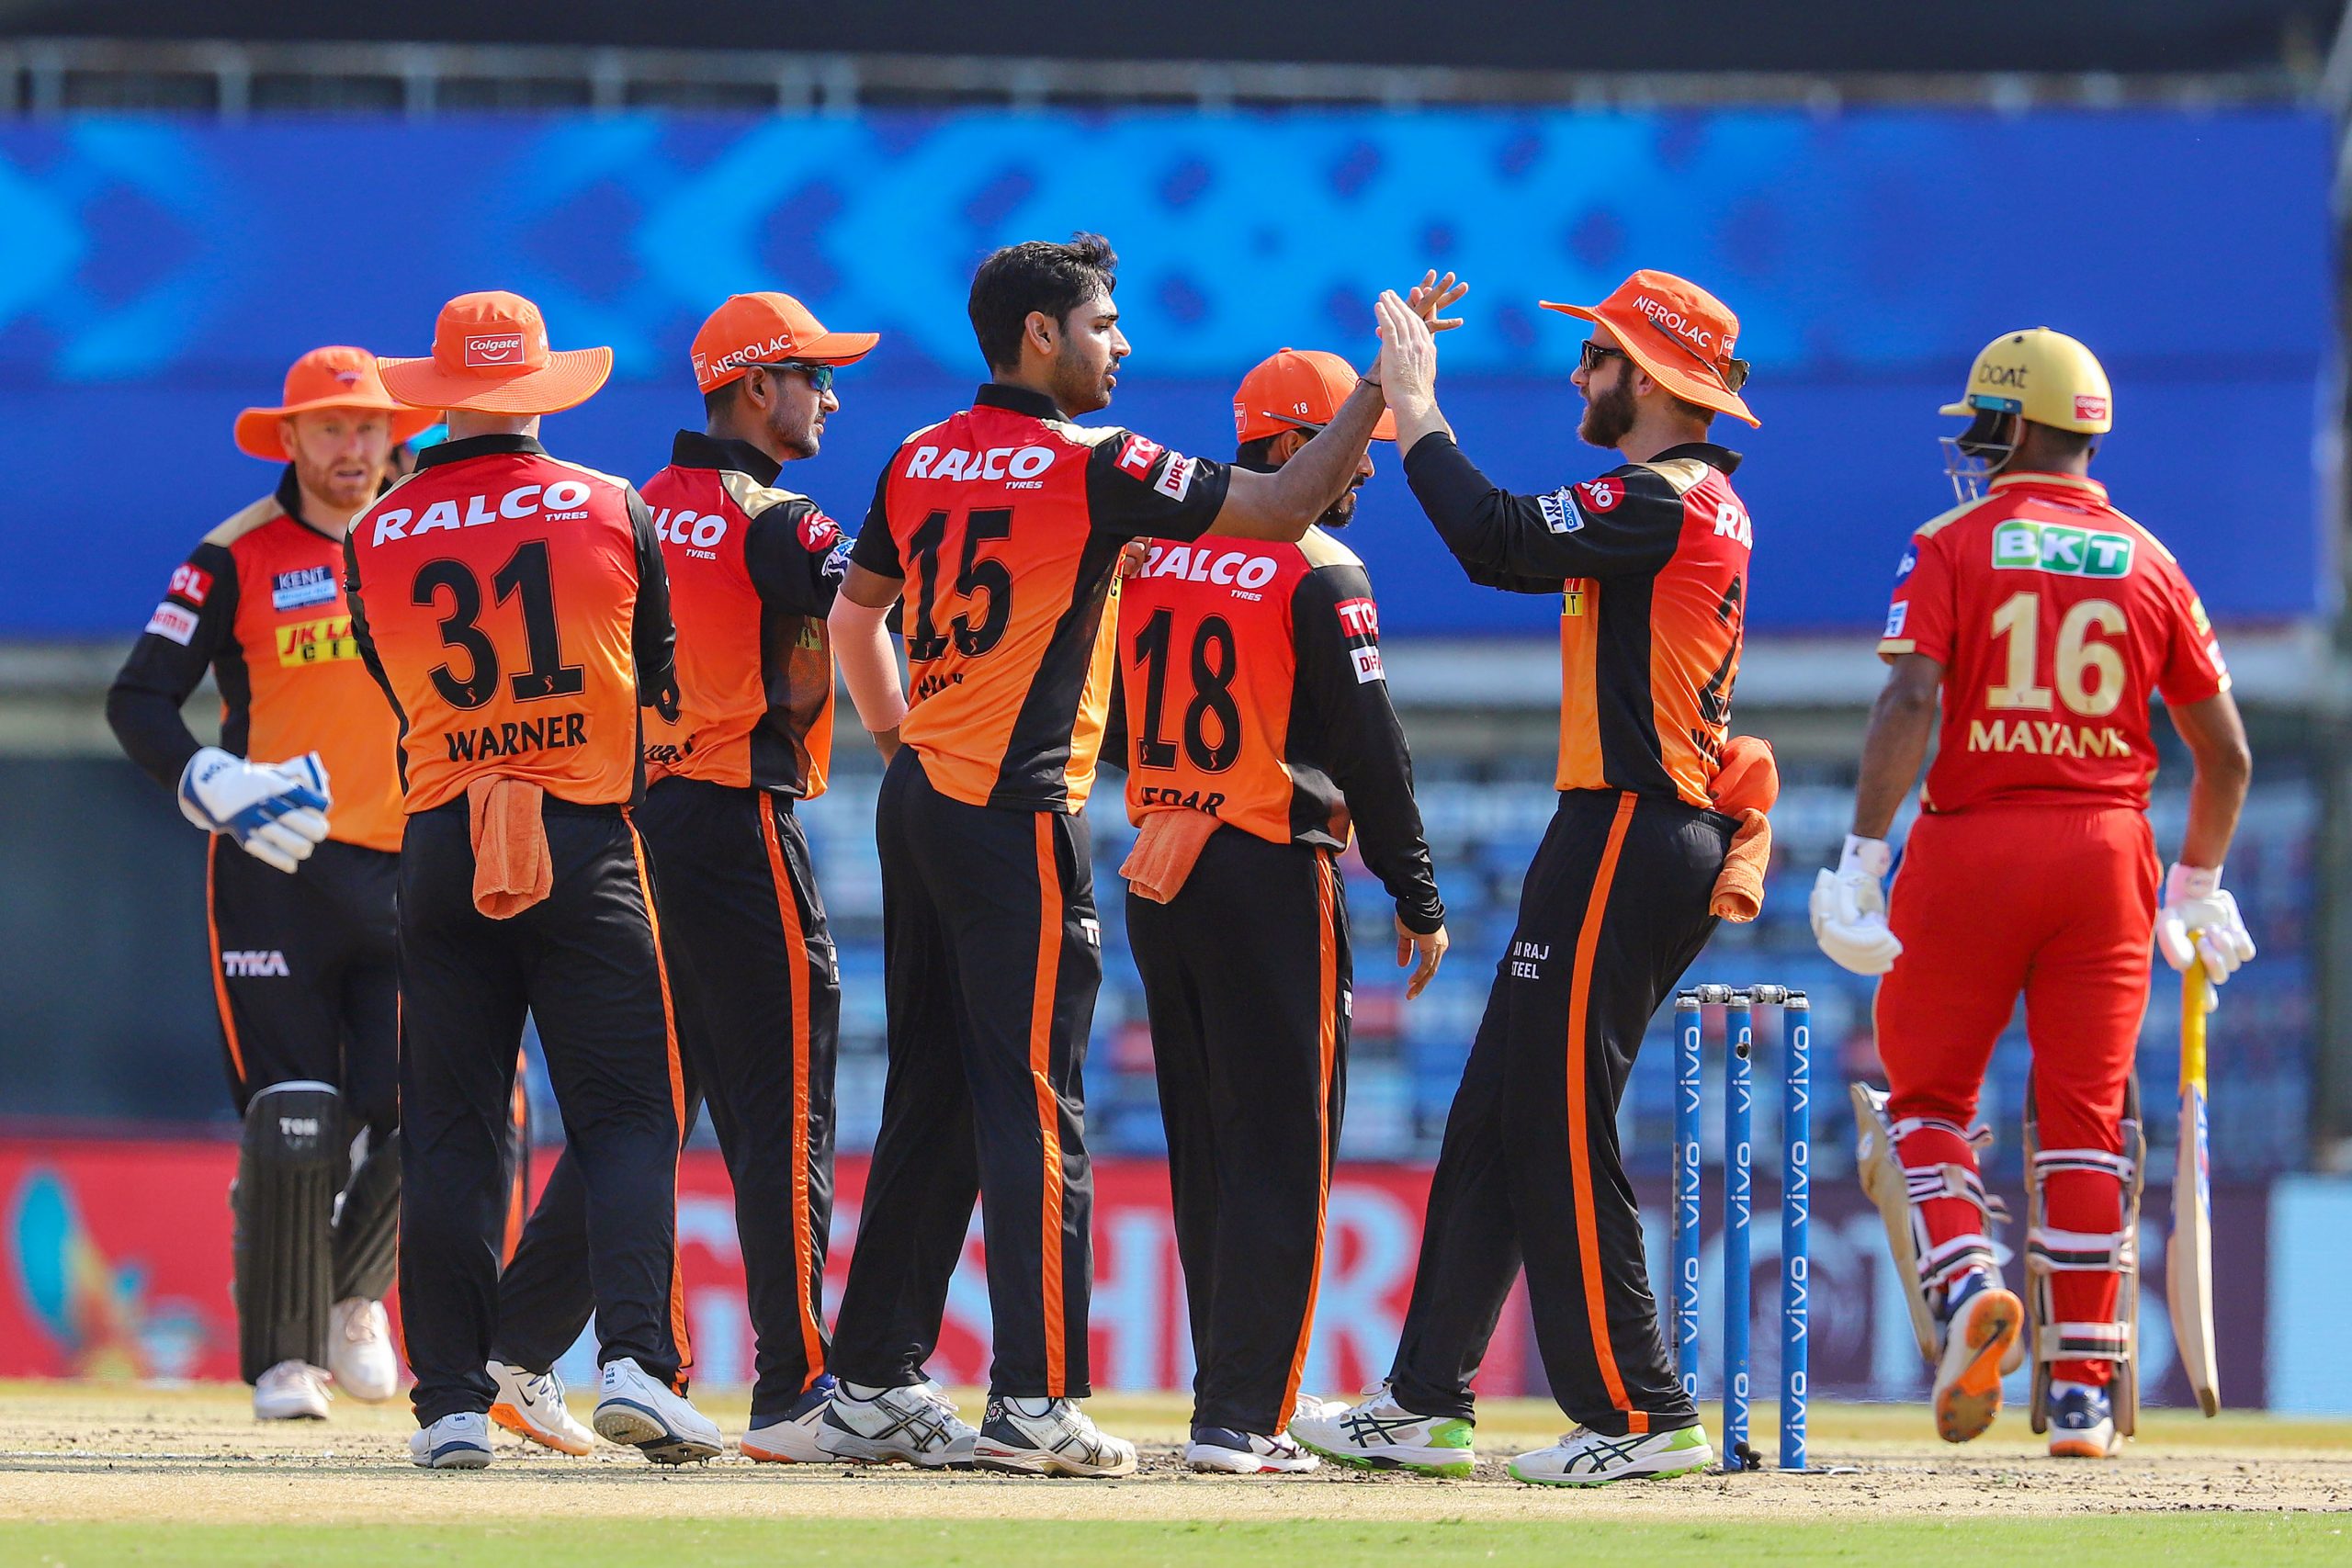 IPL 2021, SRH vs PBKS: When and where to watch live telecast, streaming?